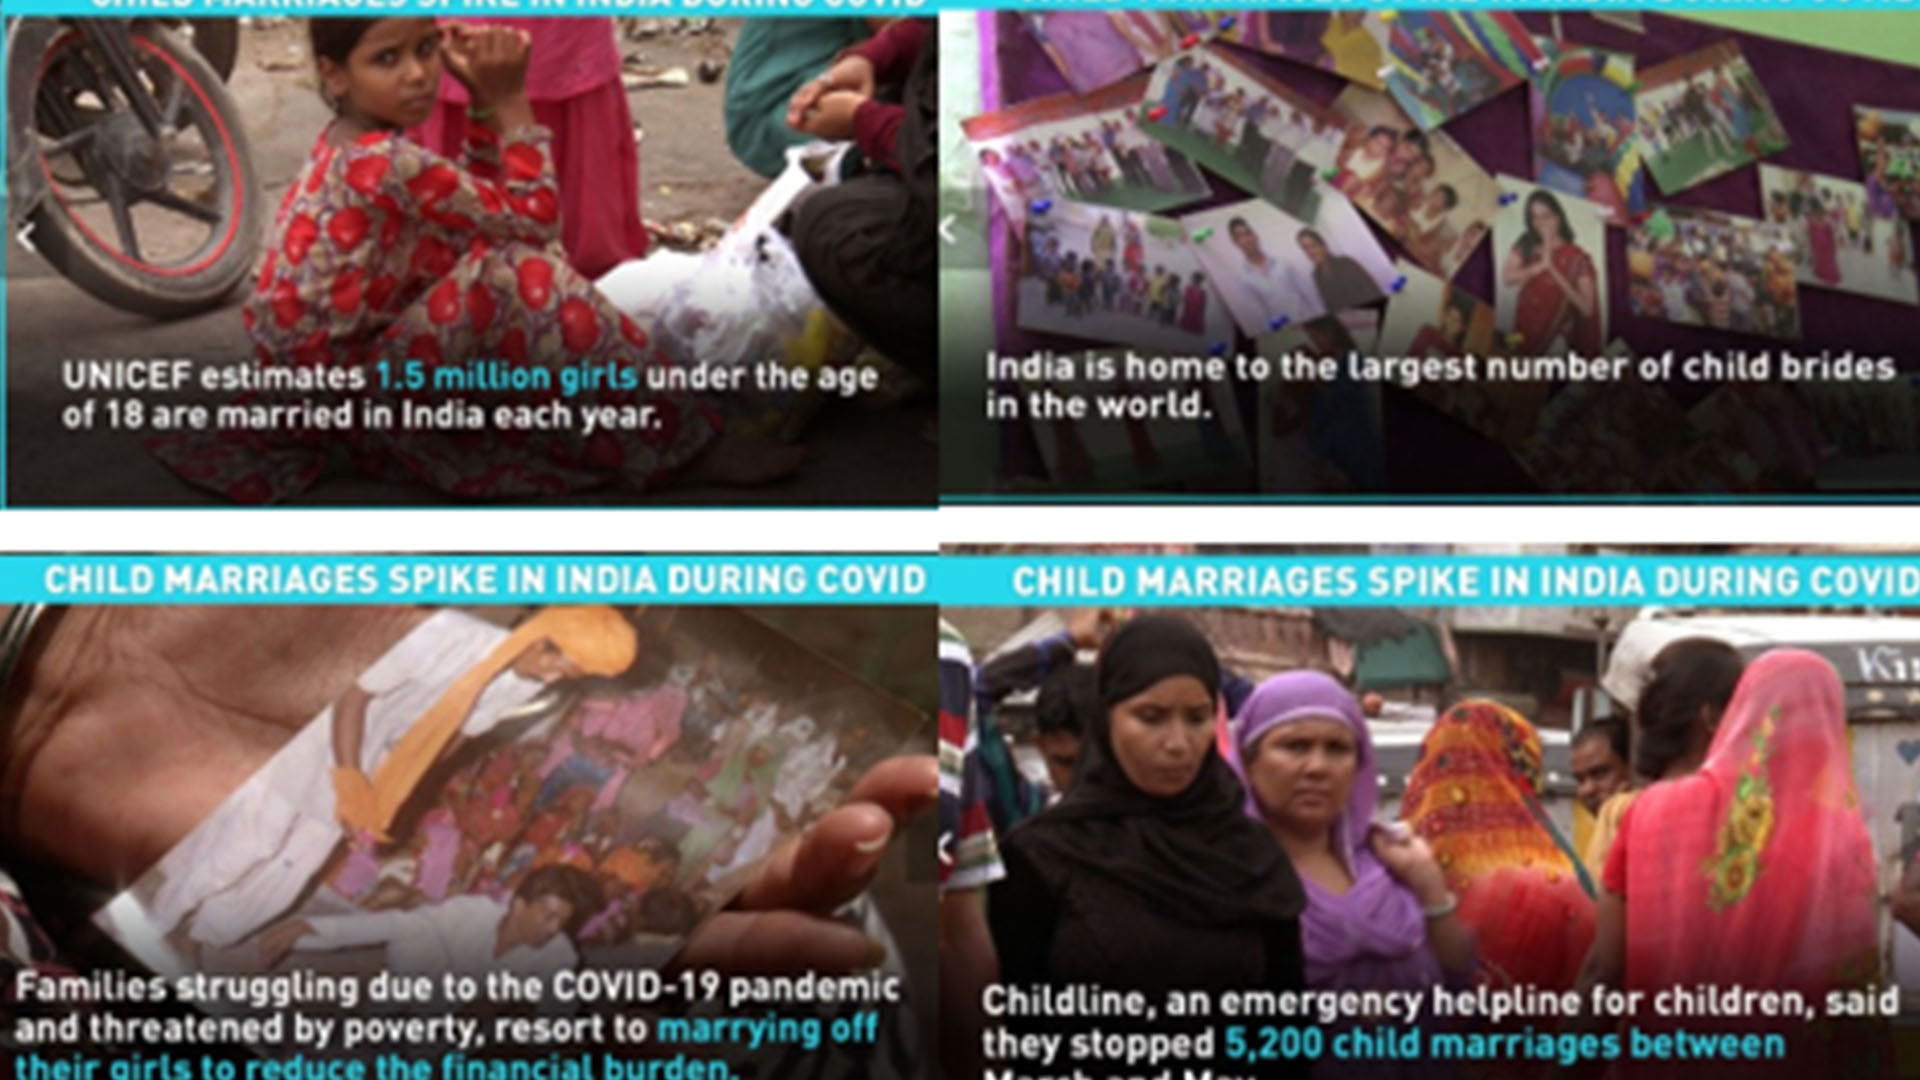 Child marriages in India rise during COVID-19 pandemic